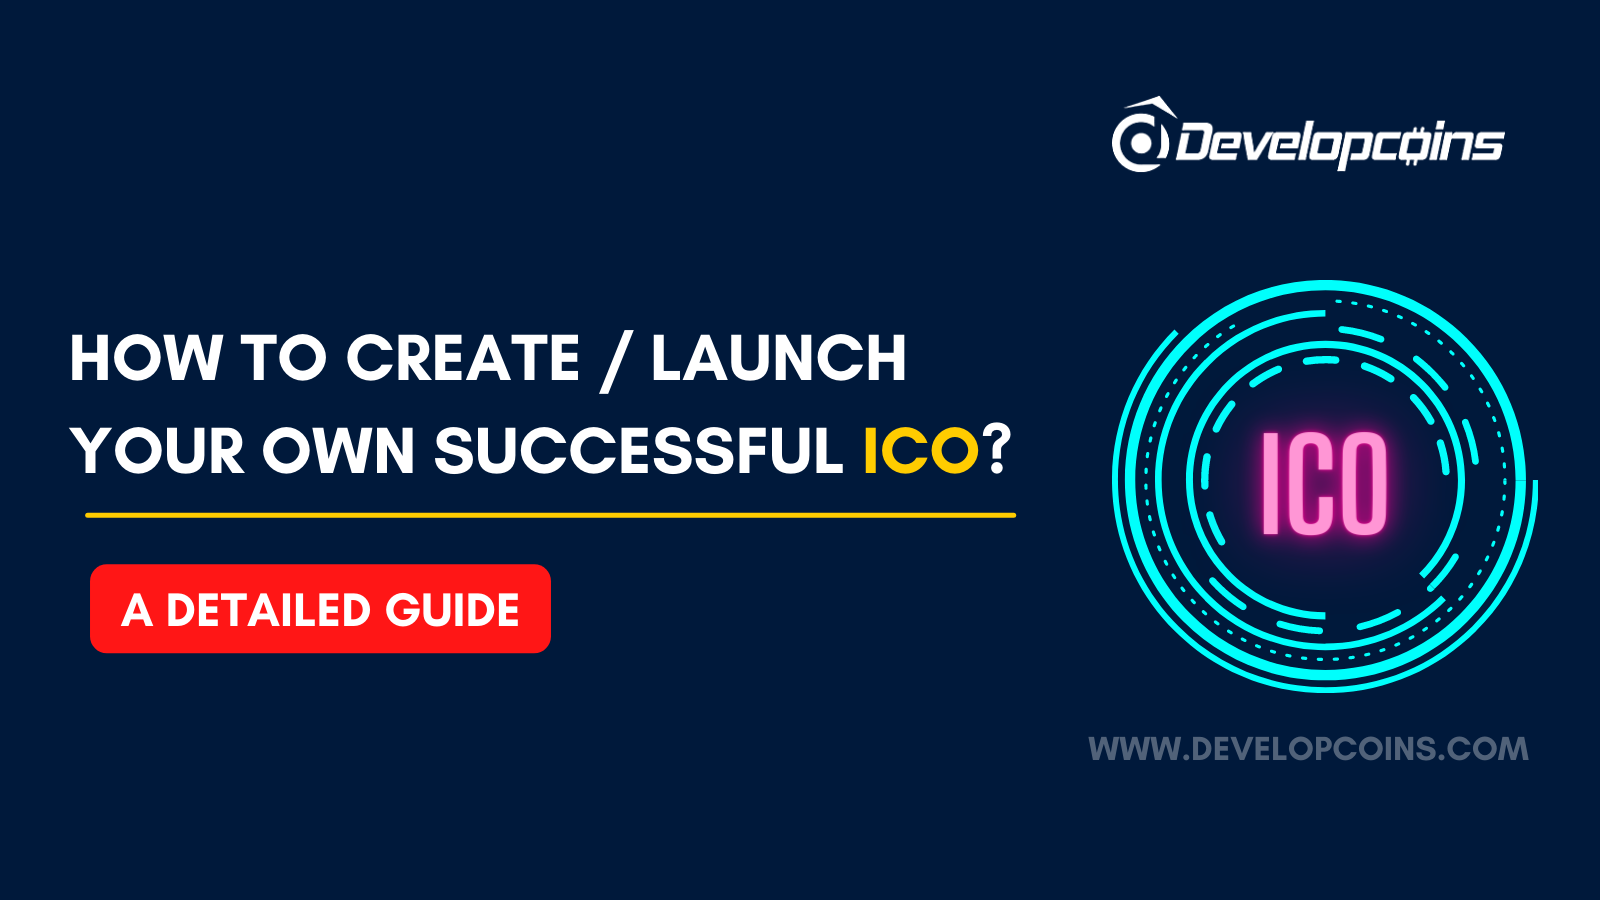 What is ICO? And How To Launch an ICO a Detailed Guide for Beginners?